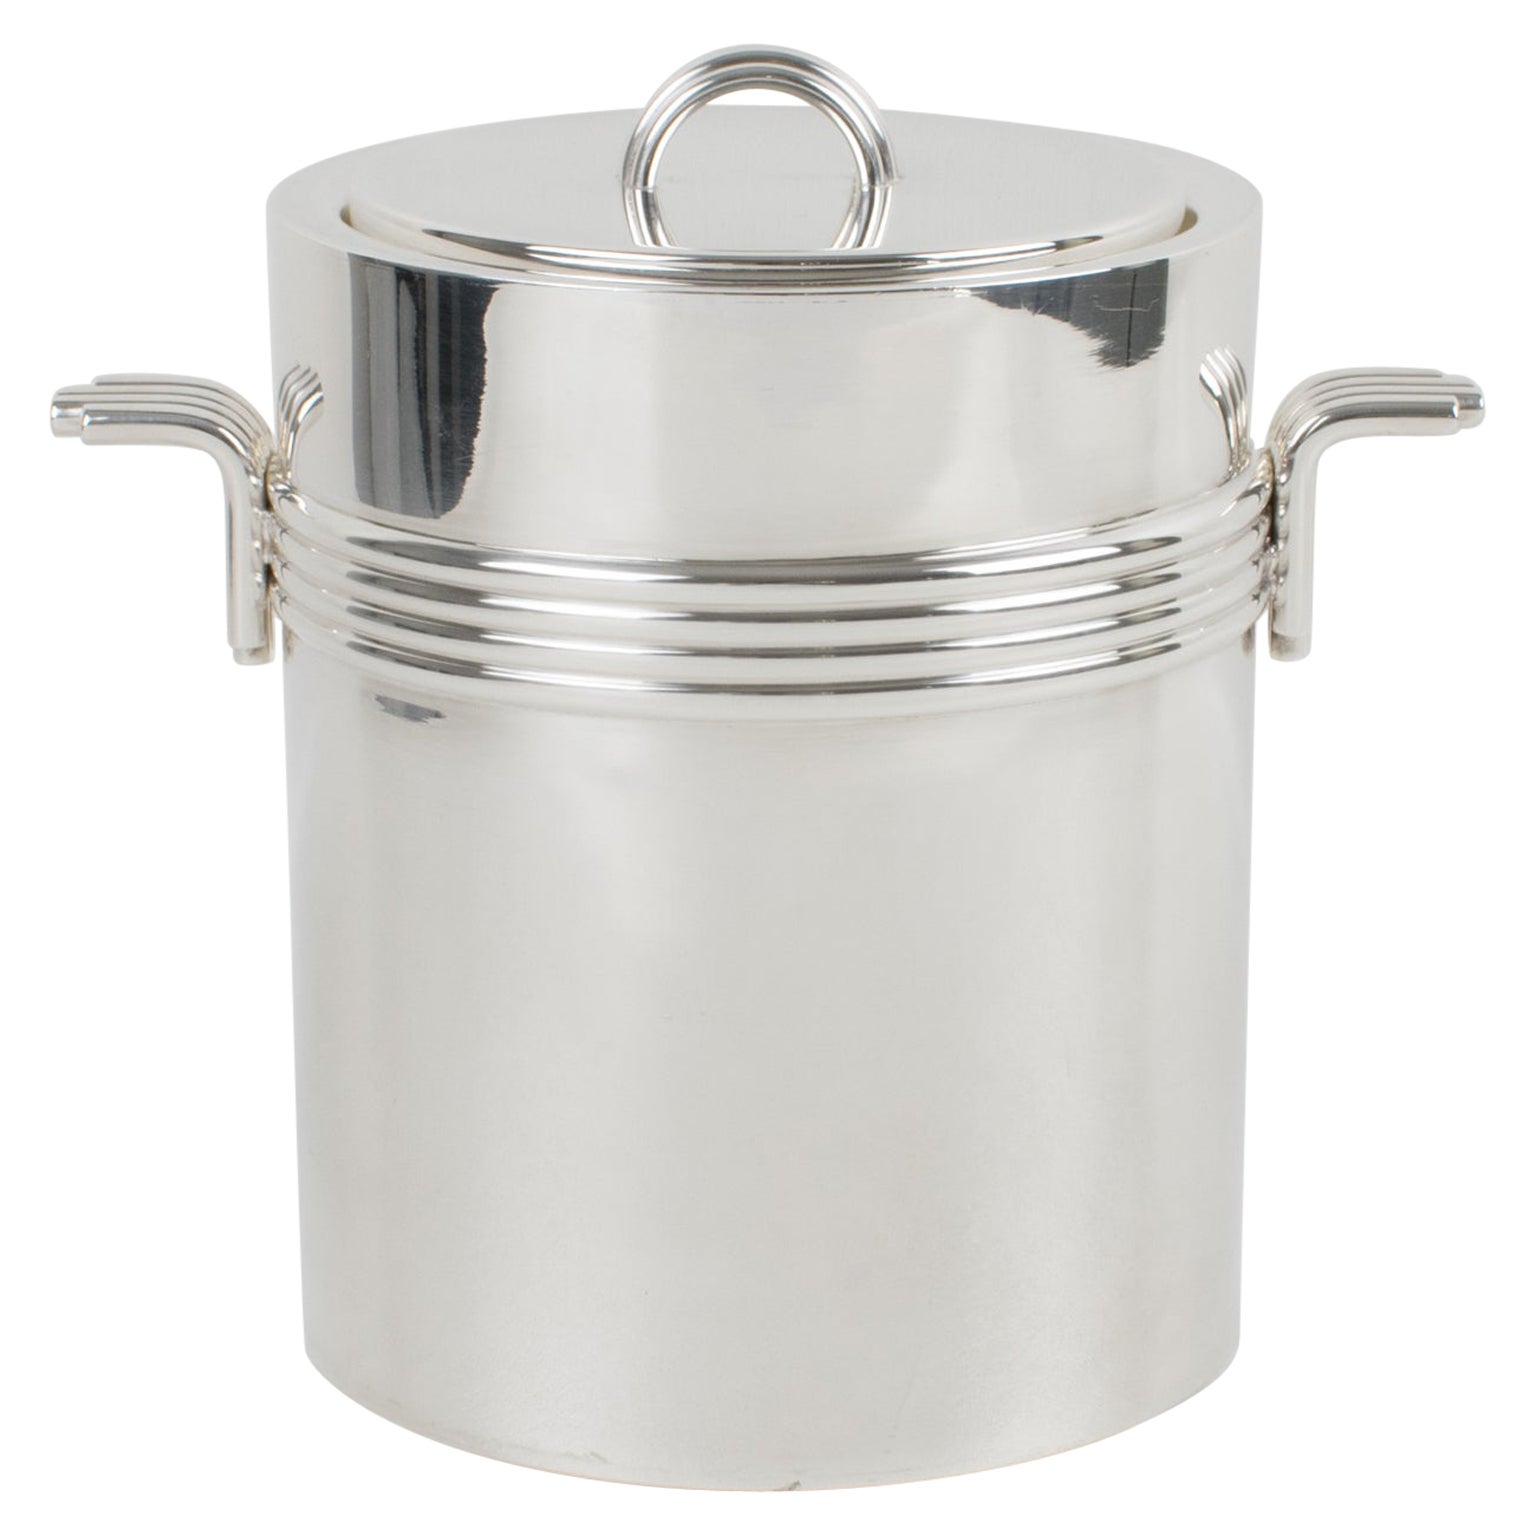 Christian Dior Silver Plate Ice Bucket Cooler